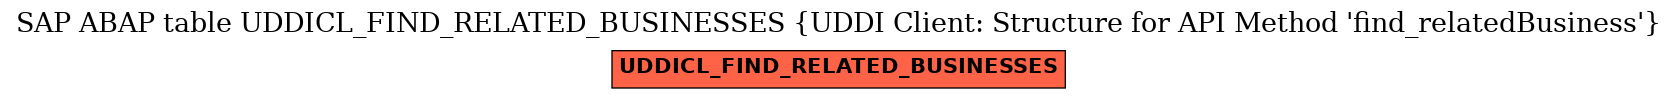 E-R Diagram for table UDDICL_FIND_RELATED_BUSINESSES (UDDI Client: Structure for API Method 'find_relatedBusiness')